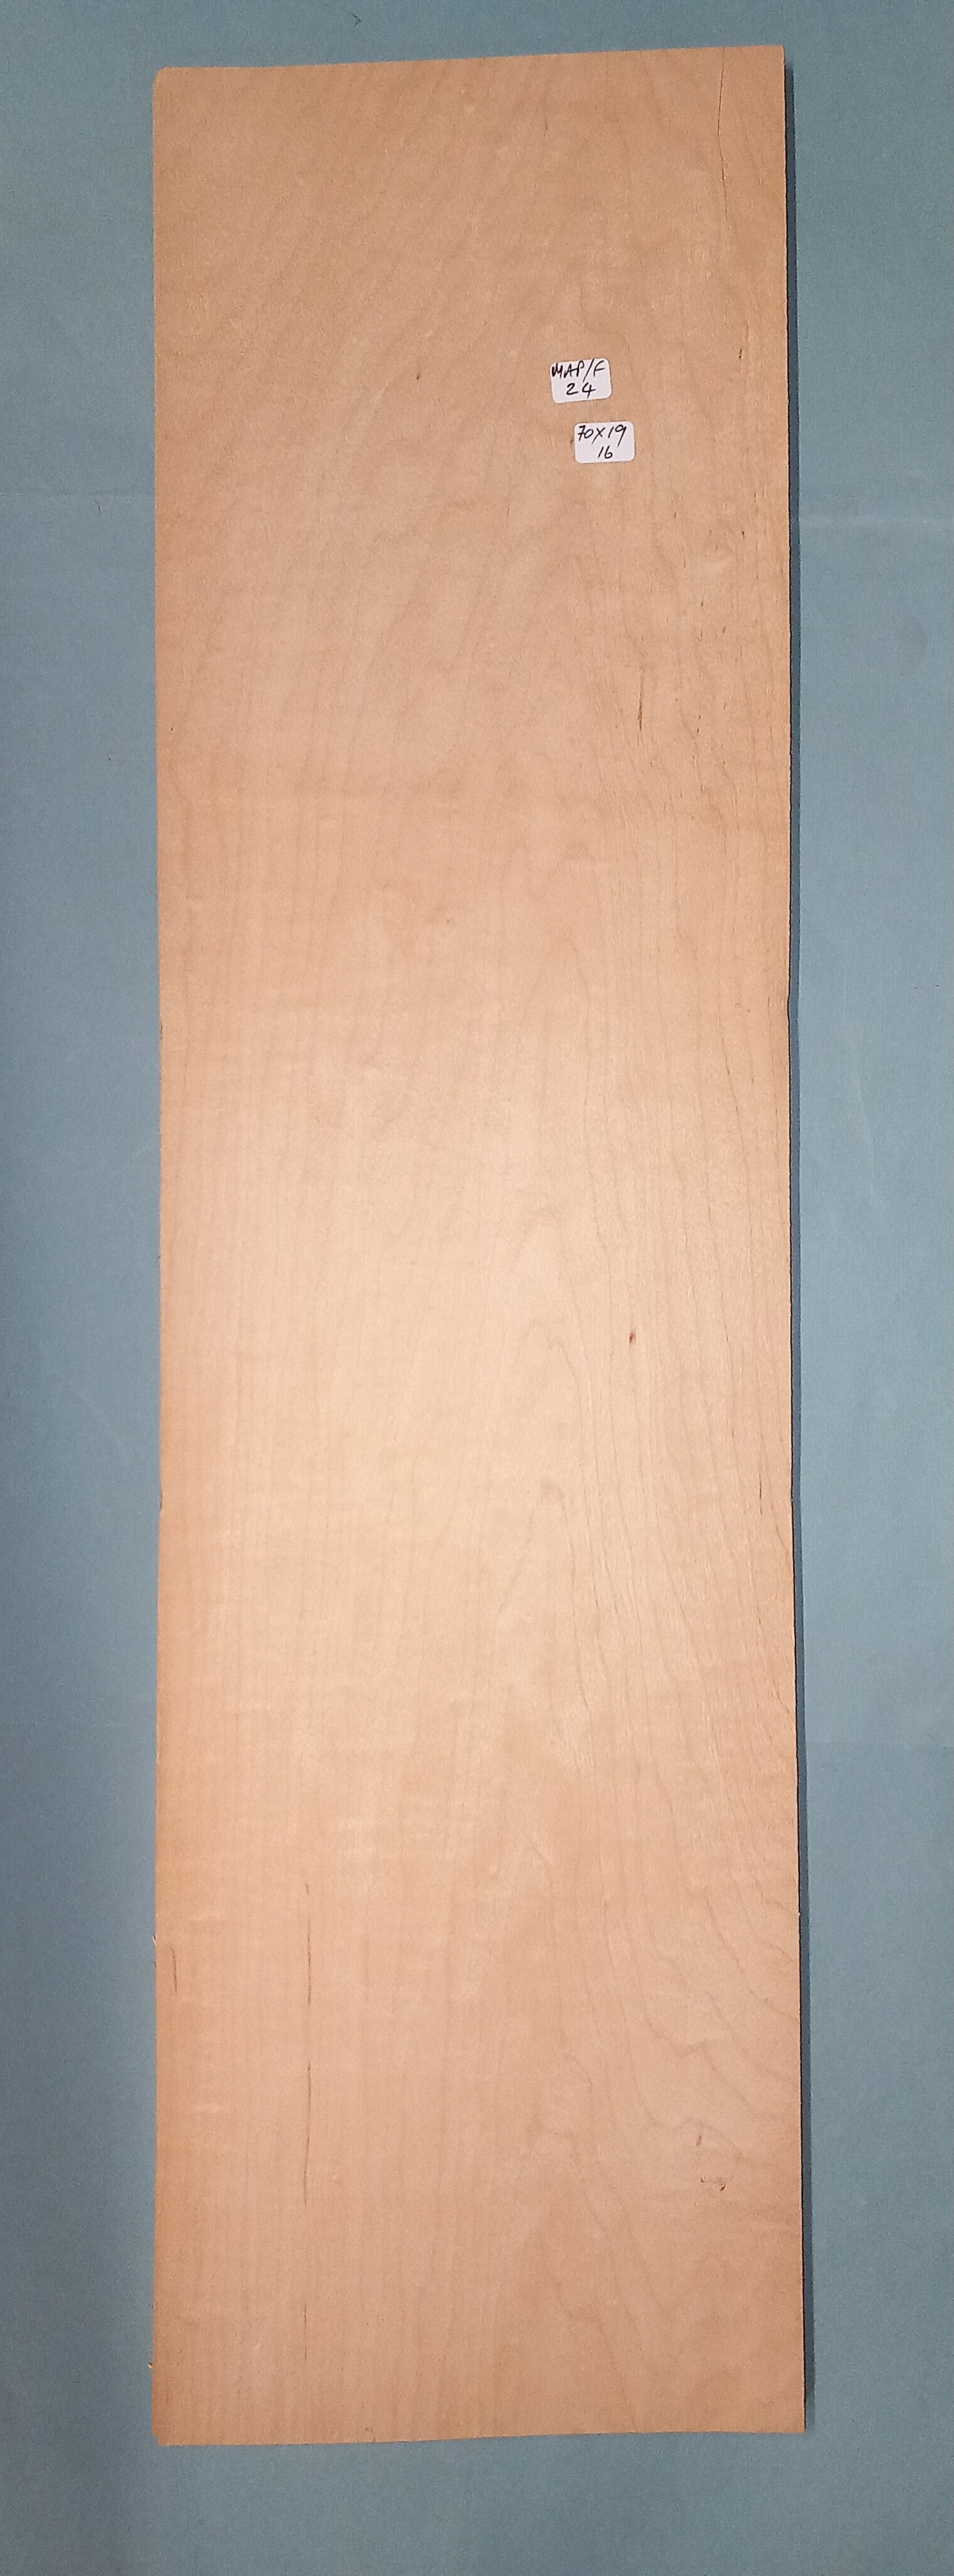 LARGE CONSECUTIVE SHEETS OF FIGURED MAPLE VENEER   70 X 19 CM